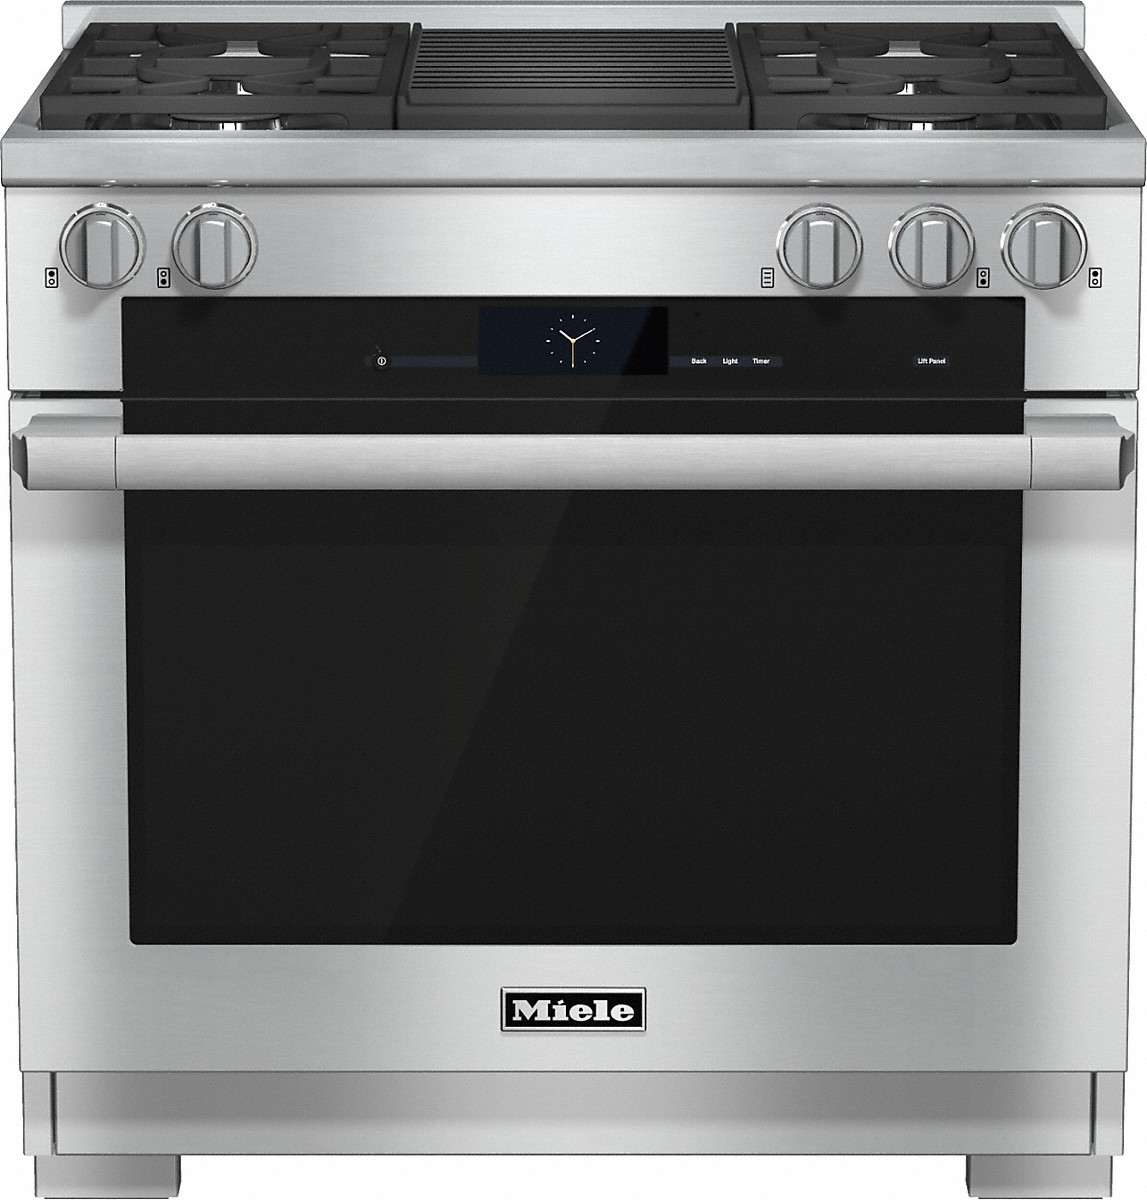 Miele - 5.8 cu. ft  Dual Fuel Range in Stainless - HR 1935-2 G